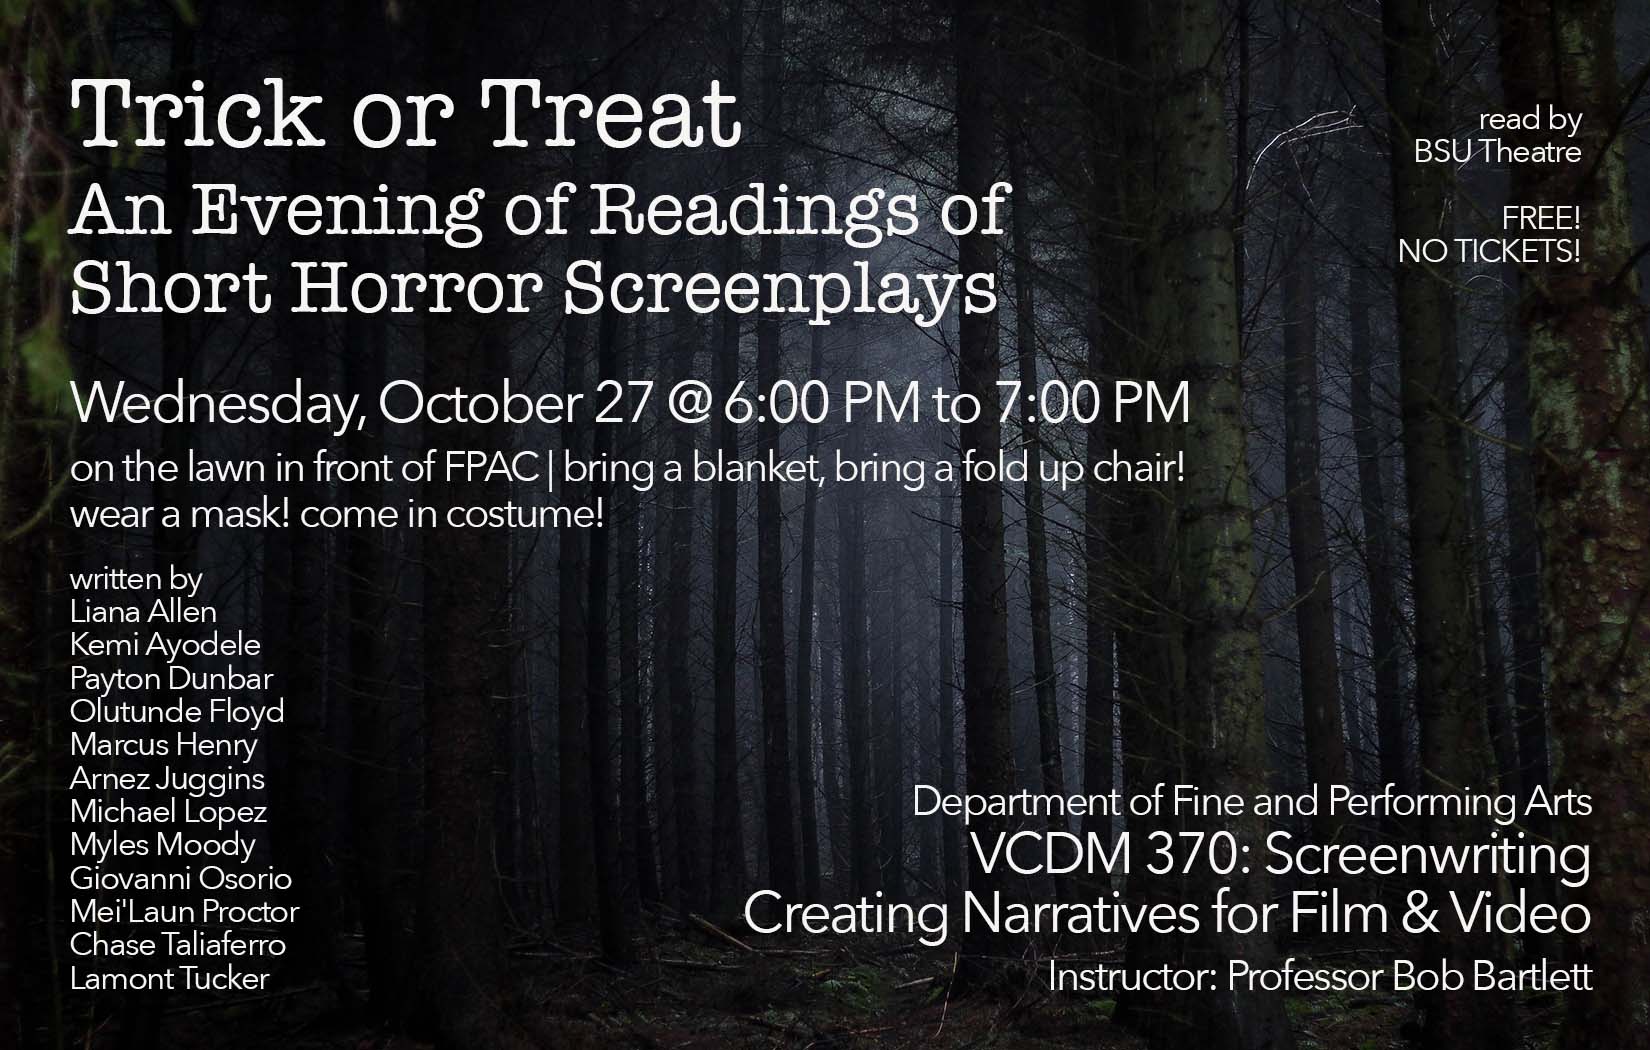 Trick or treat an evening of reading screenplays